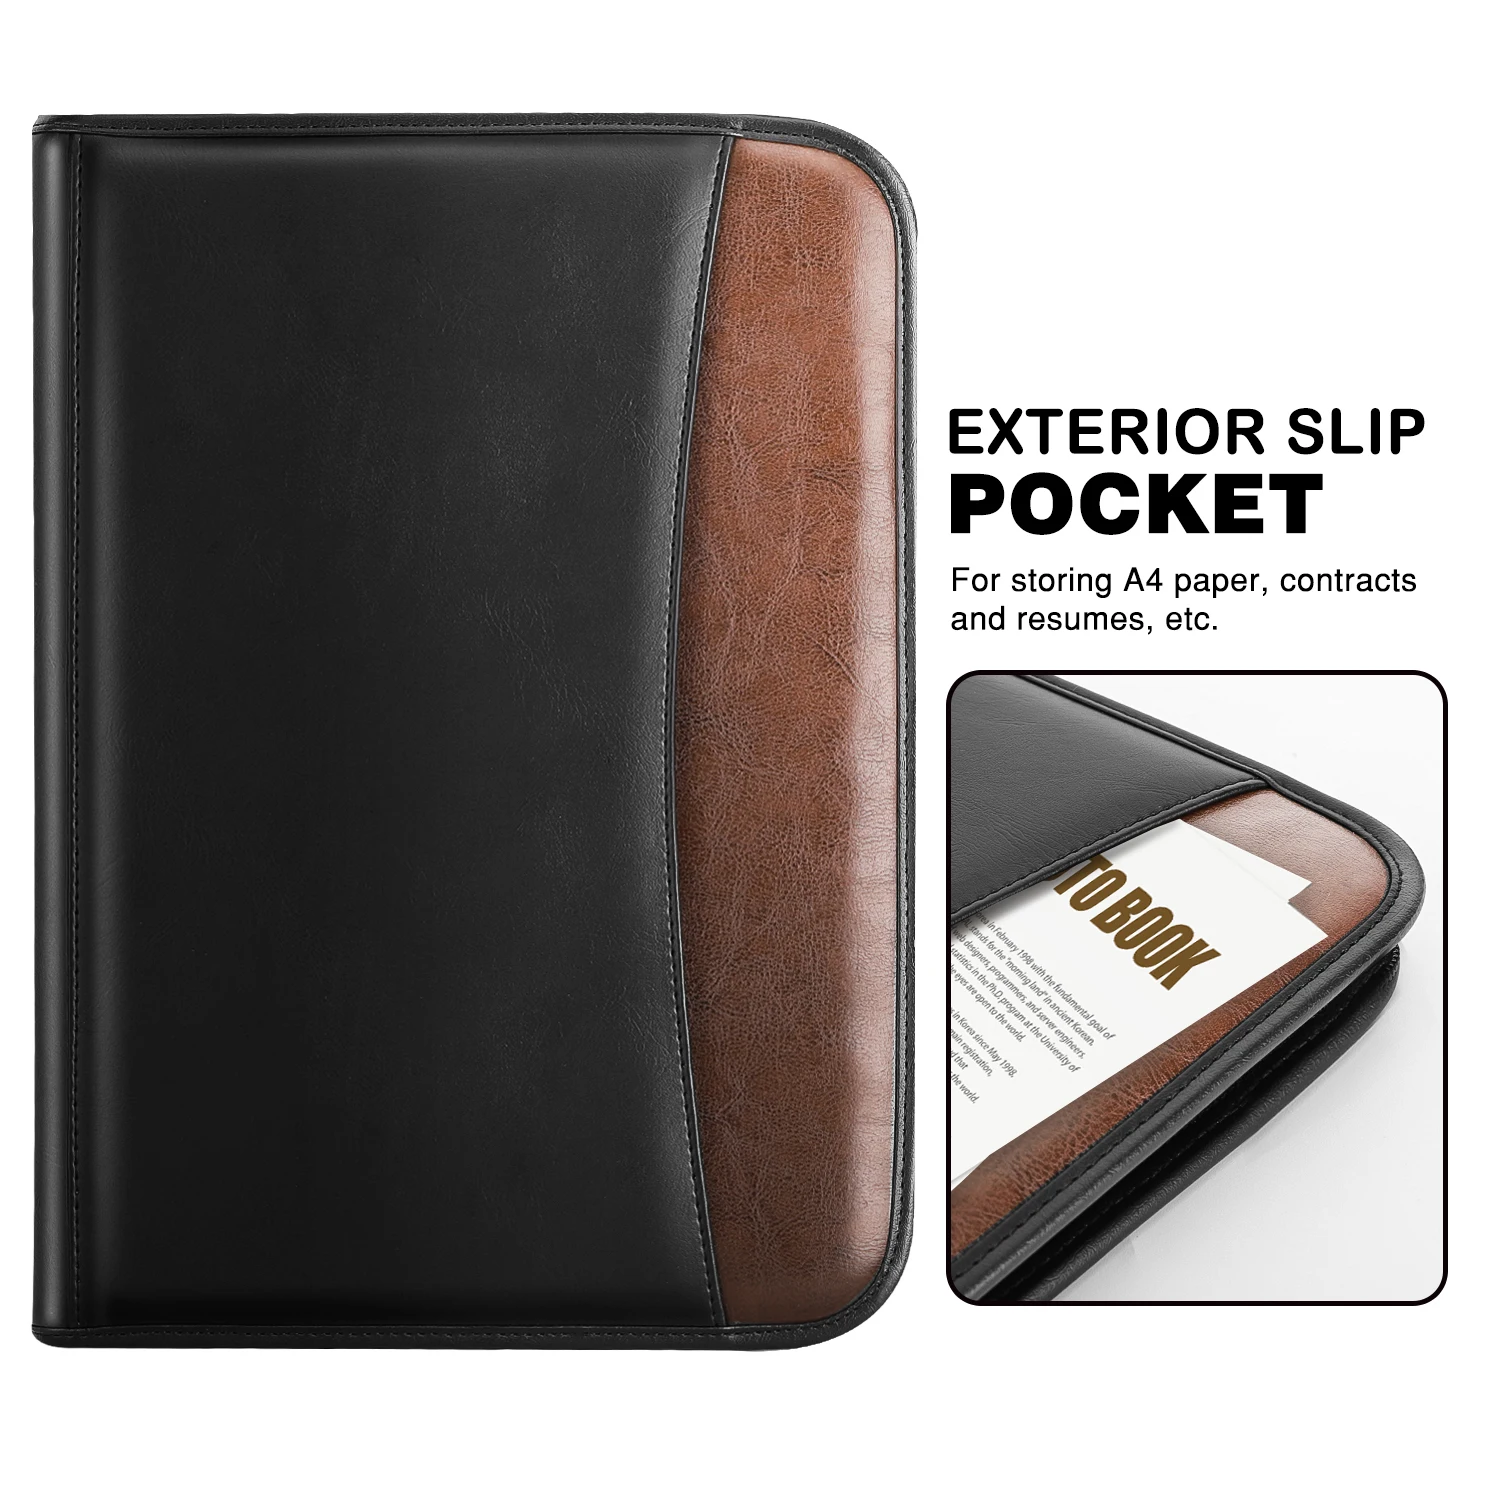 Black&Brown Card Holder and Cell Phone/iPad Holder Stylish Portfolio Office Gifts Portfolio/Leather Padfolio Folder with Free Pen and A4 Notebook- Vegan Leather Business Portfolio with Clipboard 